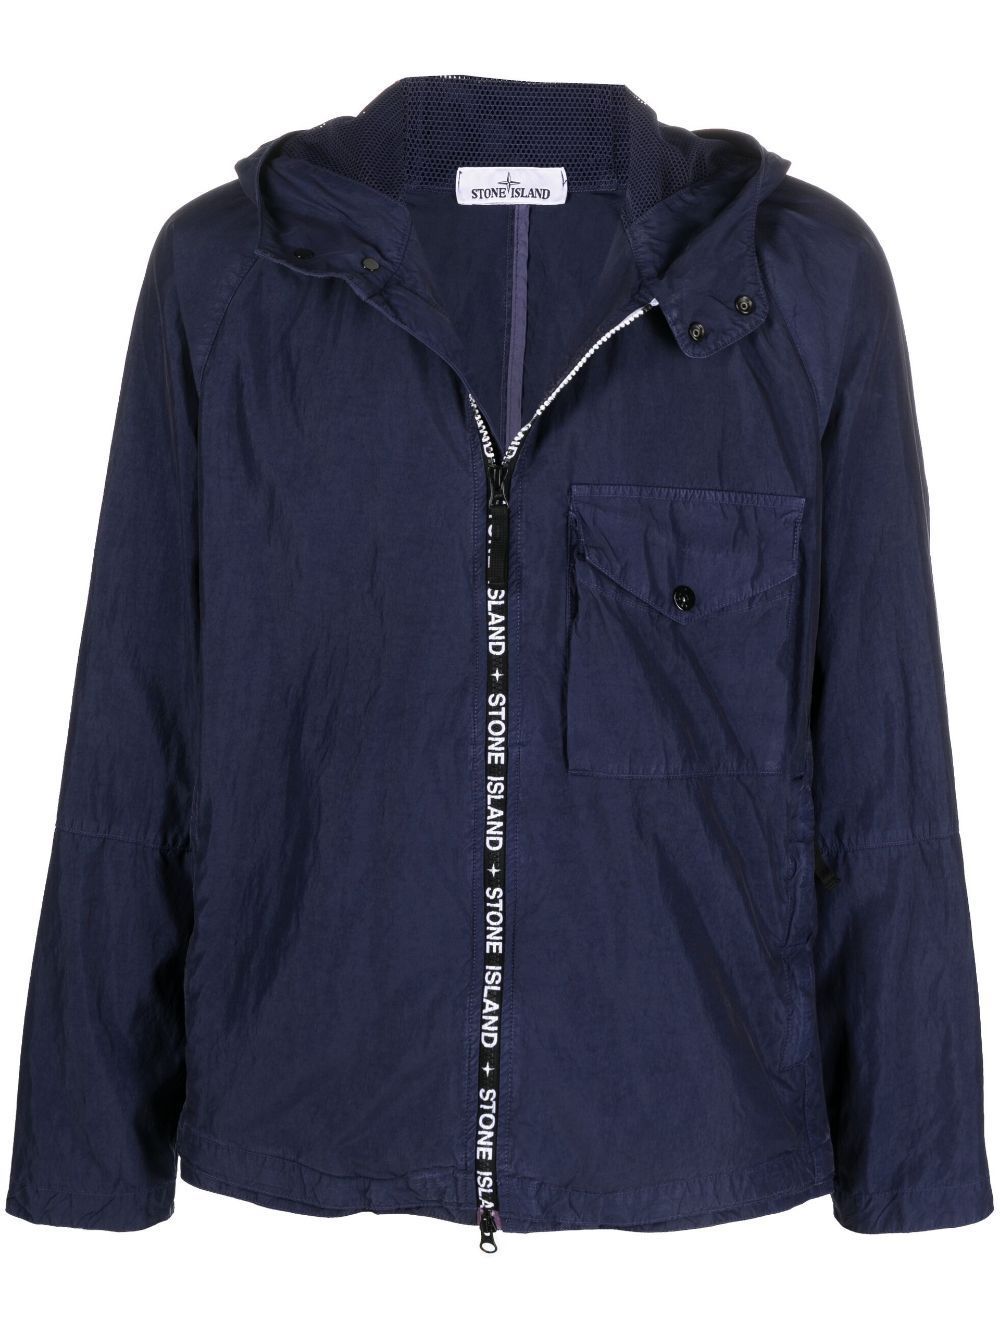 STONE ISLAND Blue Technical Fabric Hooded Jacket for Men - SS22 Collection